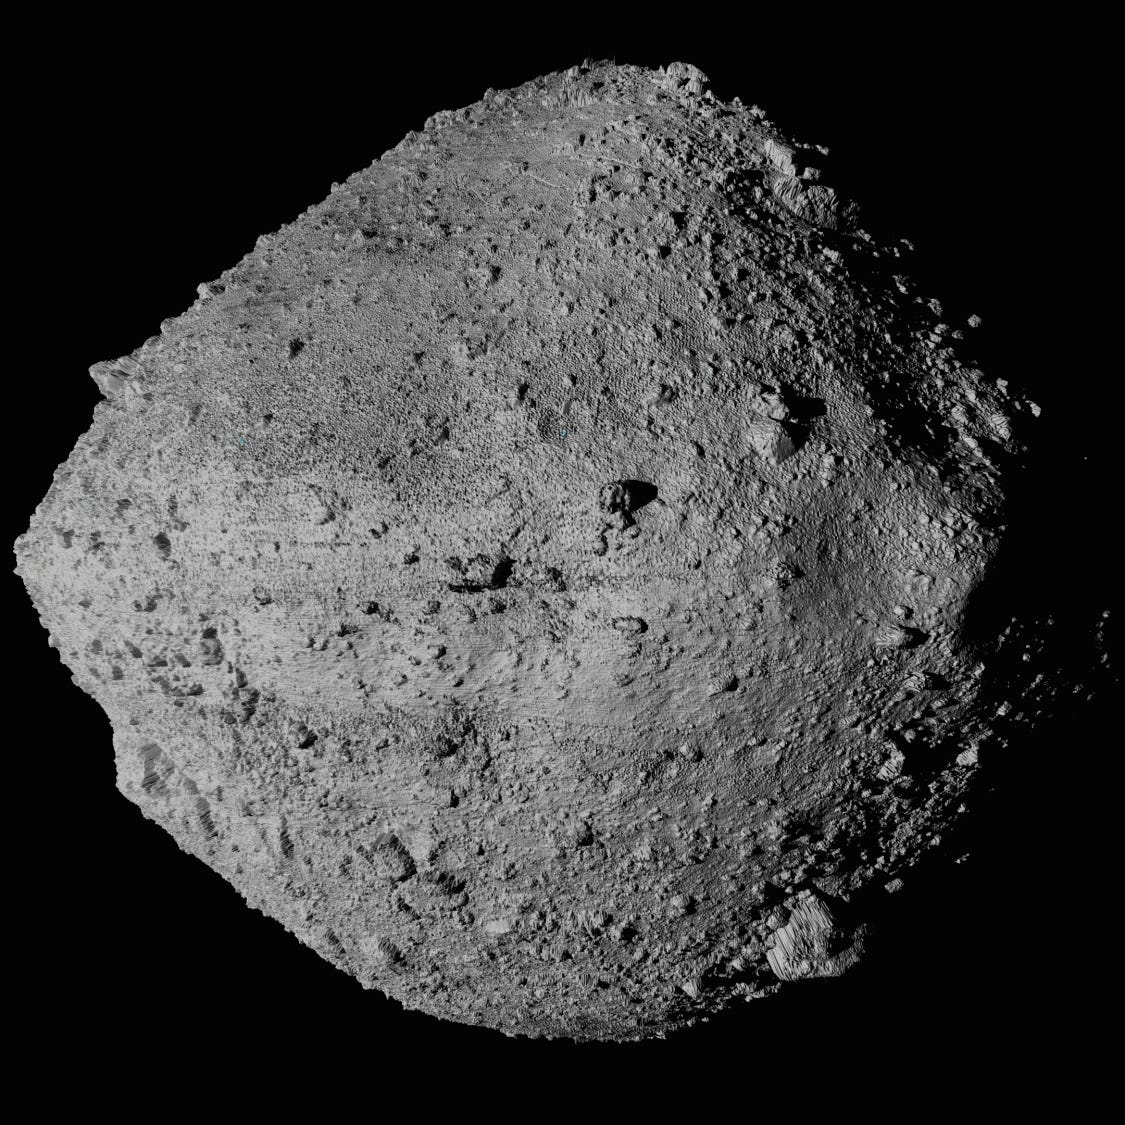 Five asteroids are expected to pass by the Earth from March 31 to June 2.